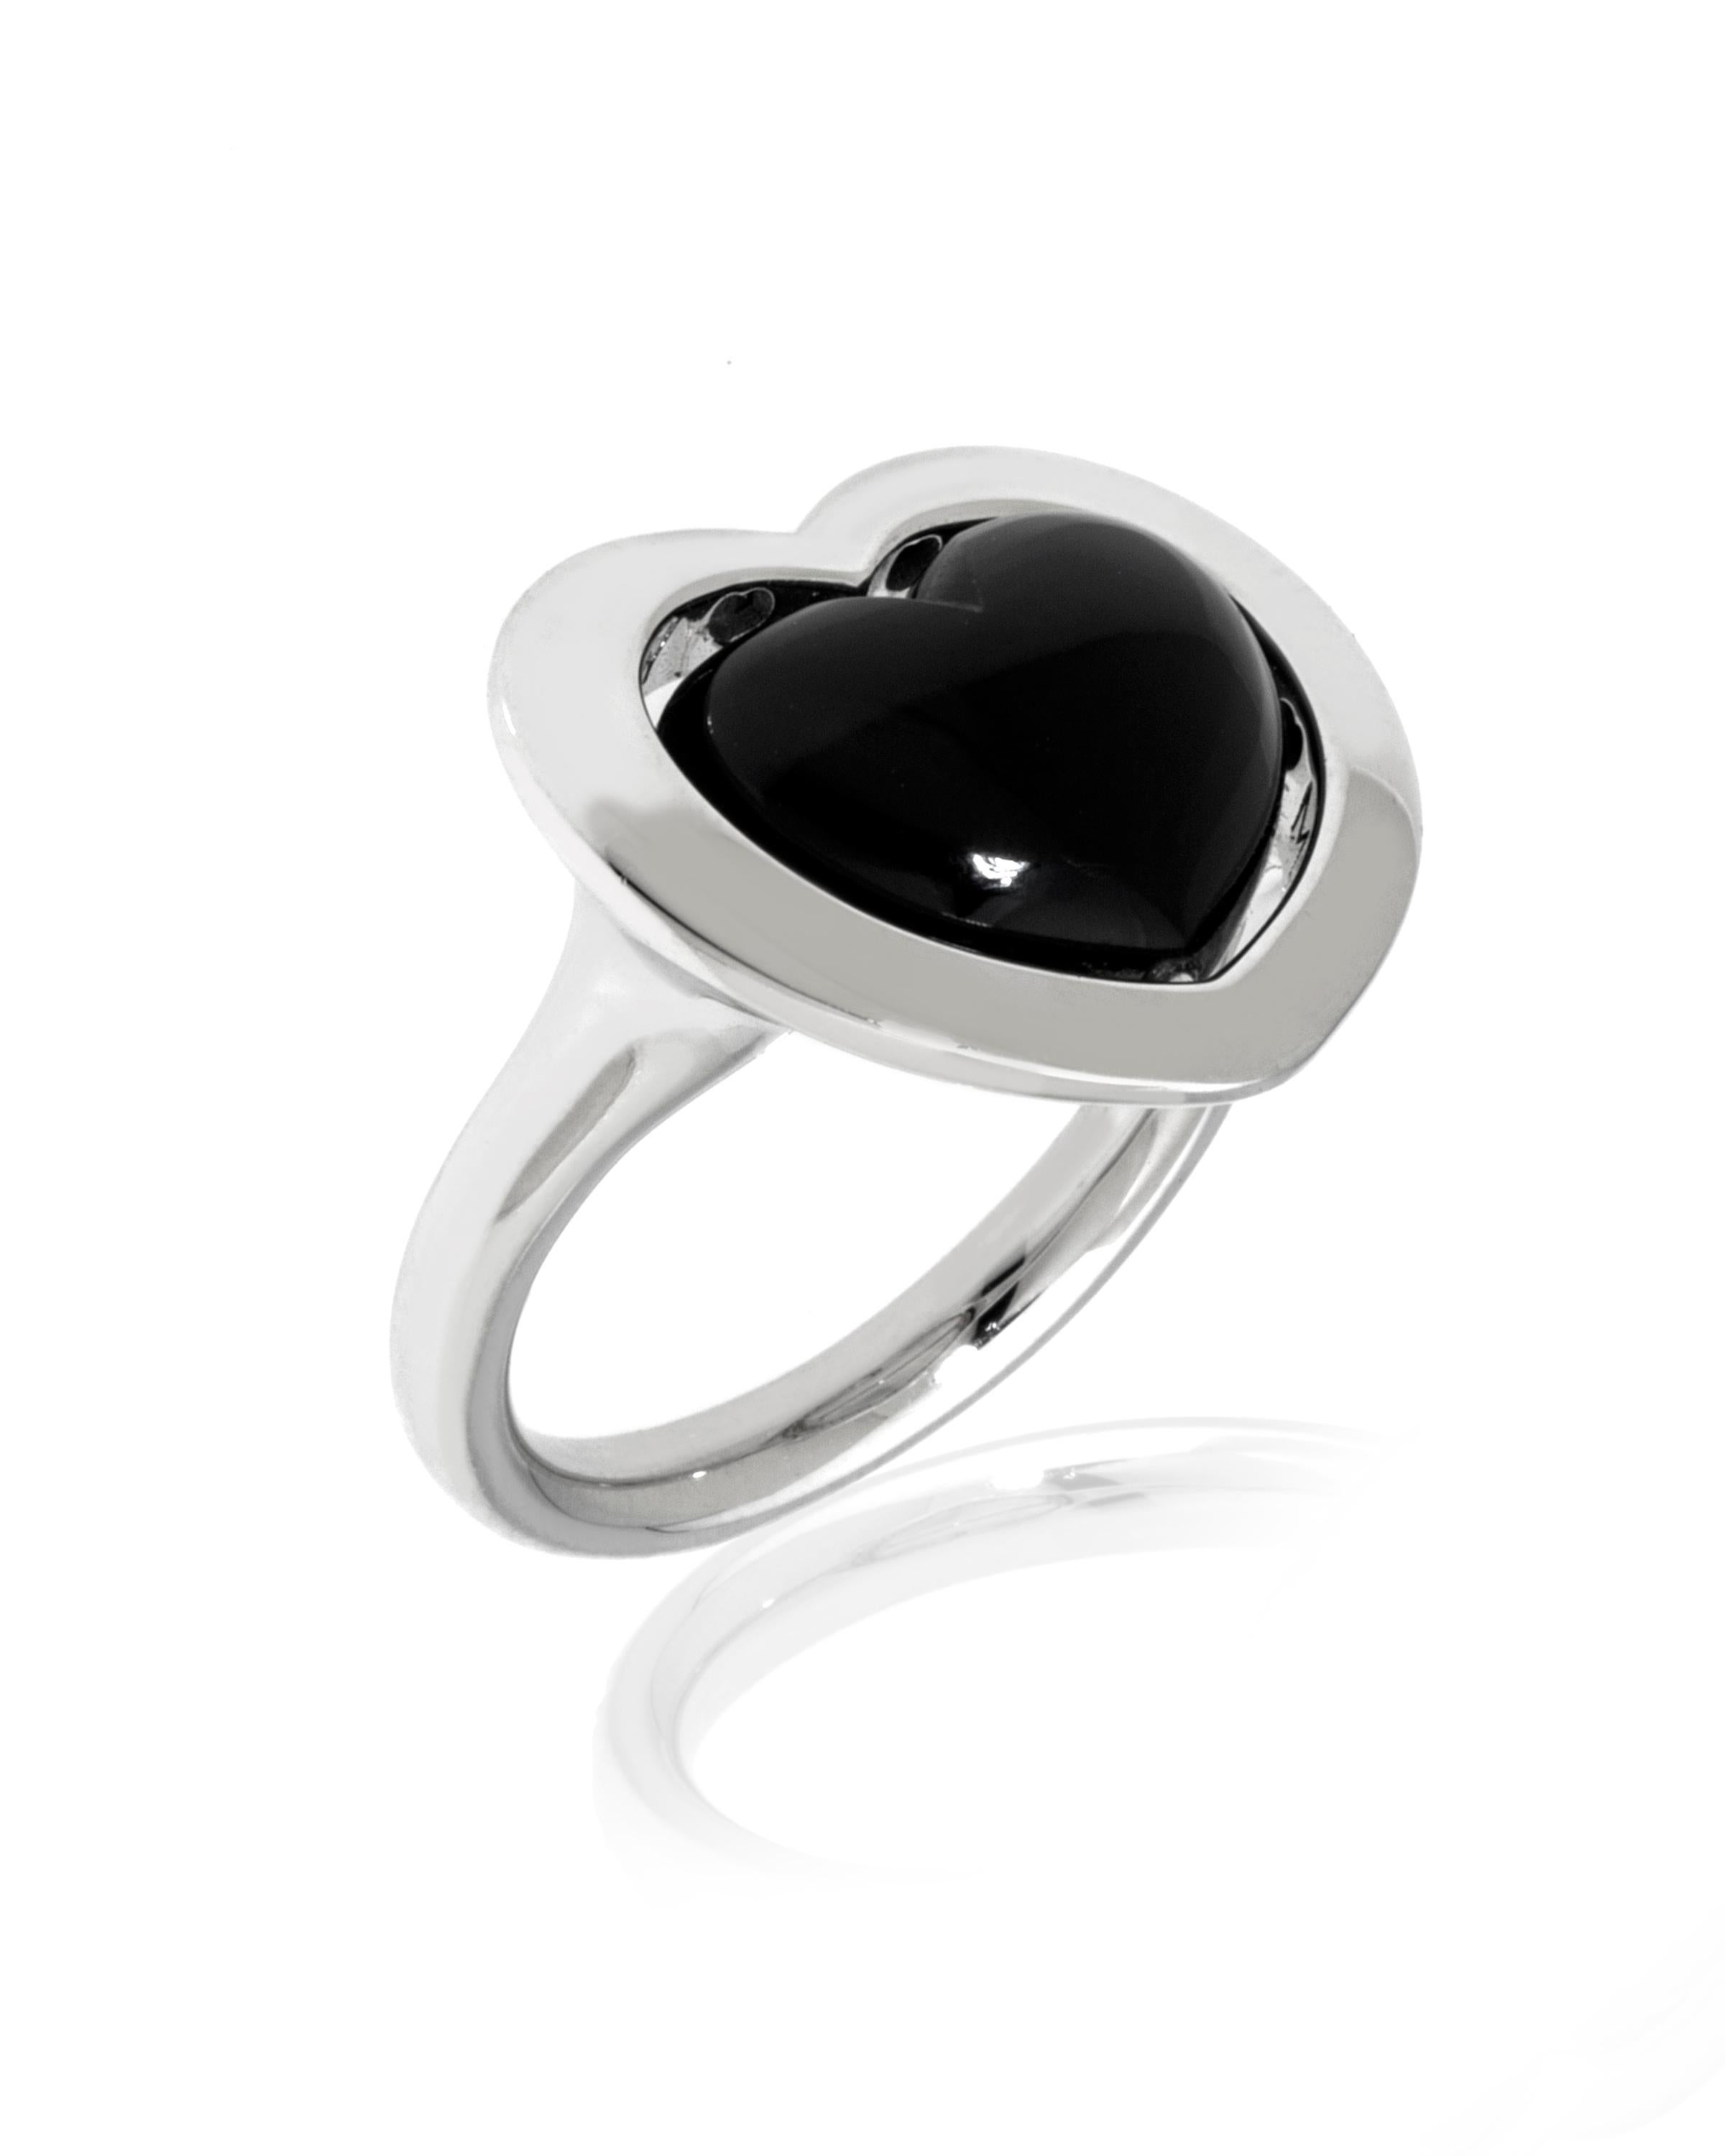 This whimsical Mimi Milano 18K white gold cocktail ring features an onyx convex heart which can be rotated to reveal a flat white gold side, framed in a matching 18K white gold frame and band. The ring size is 6.5. The decoration size is 3/4